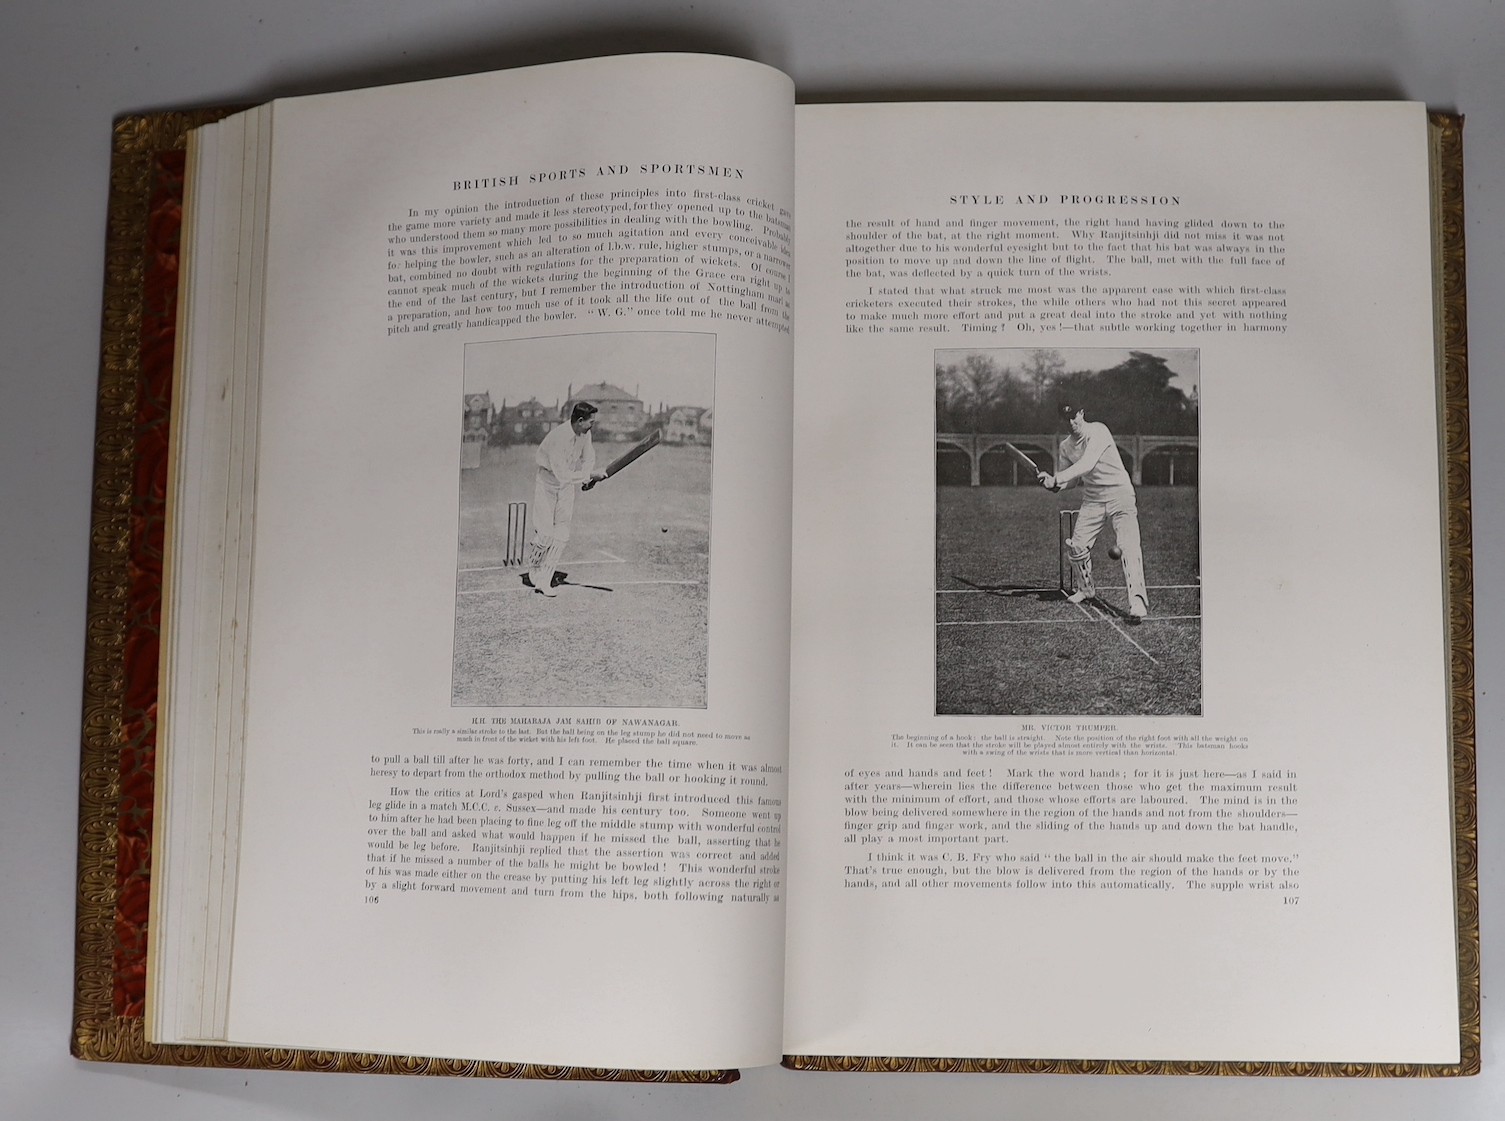 The Sportsman - British Sports and Sportsmen: Cricket and football, one of 1000, folio, red morocco gilt, with tissue-guarded full-page plates, London, 1917 and Sidney, Samuel - The Book of the Horse, 3rd edition, 4to, h